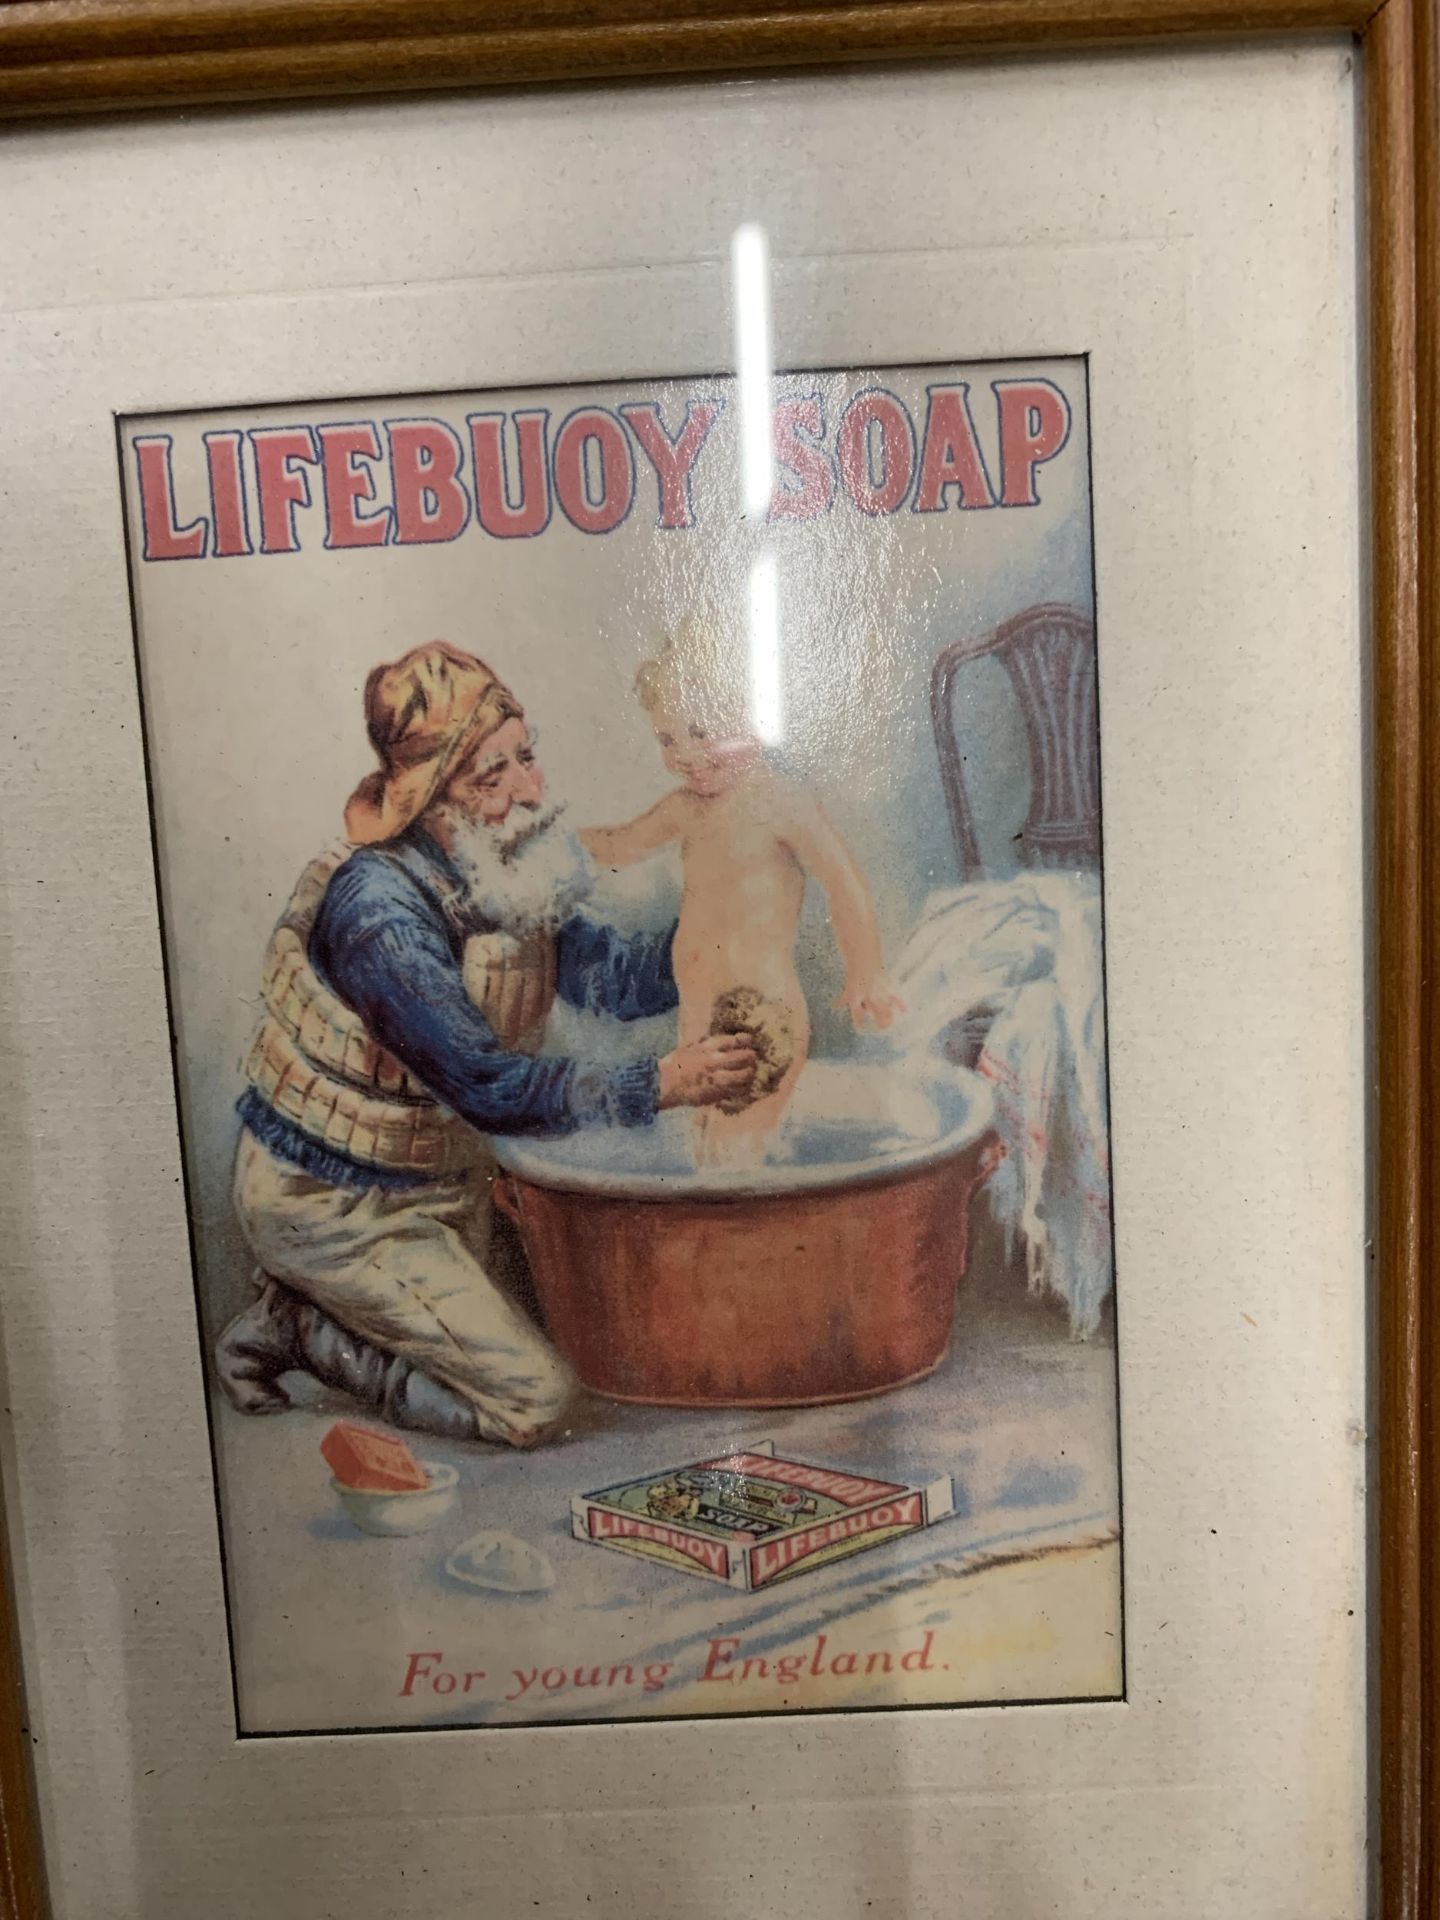 SIX FRAMED VINTAGE ADVERTISING SOAP PICTURES TO INCLUDE LIFEBUDY SOAP, IVY SOAP, SUNLIGTH SOAP AND - Image 4 of 7